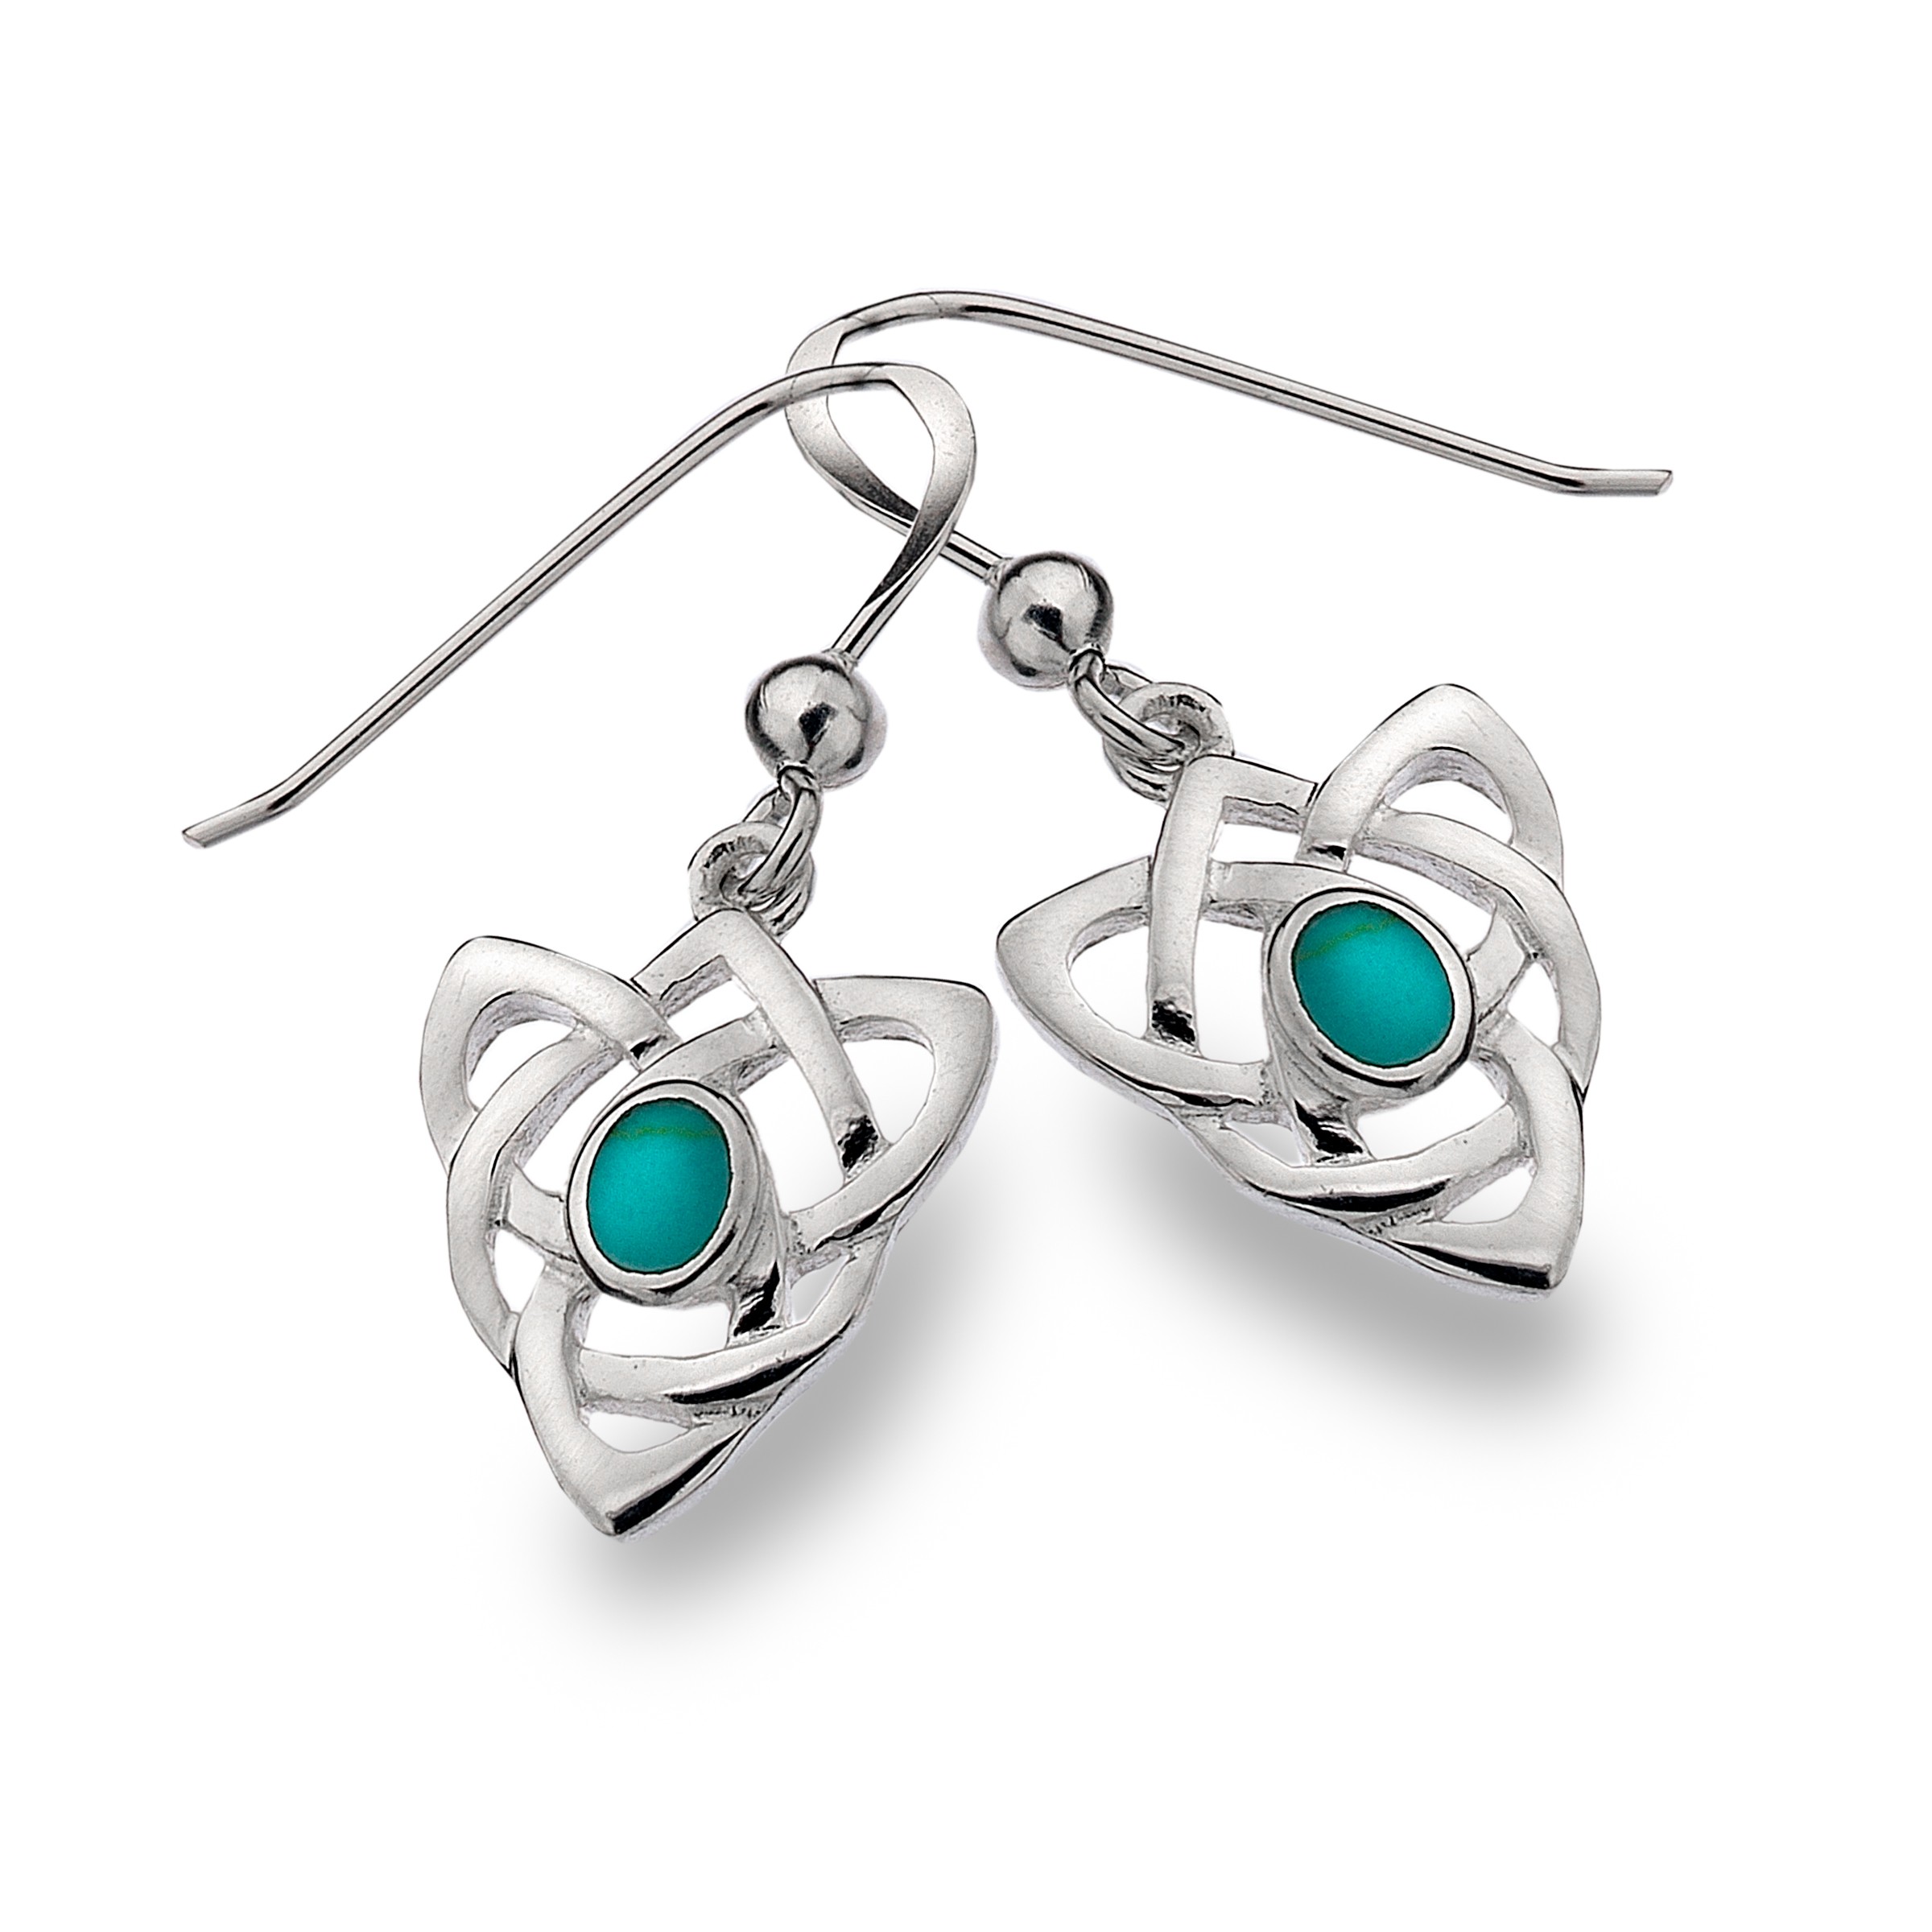 Celtic Knot & Turquoise Triangular Sterling Silver Earrings 